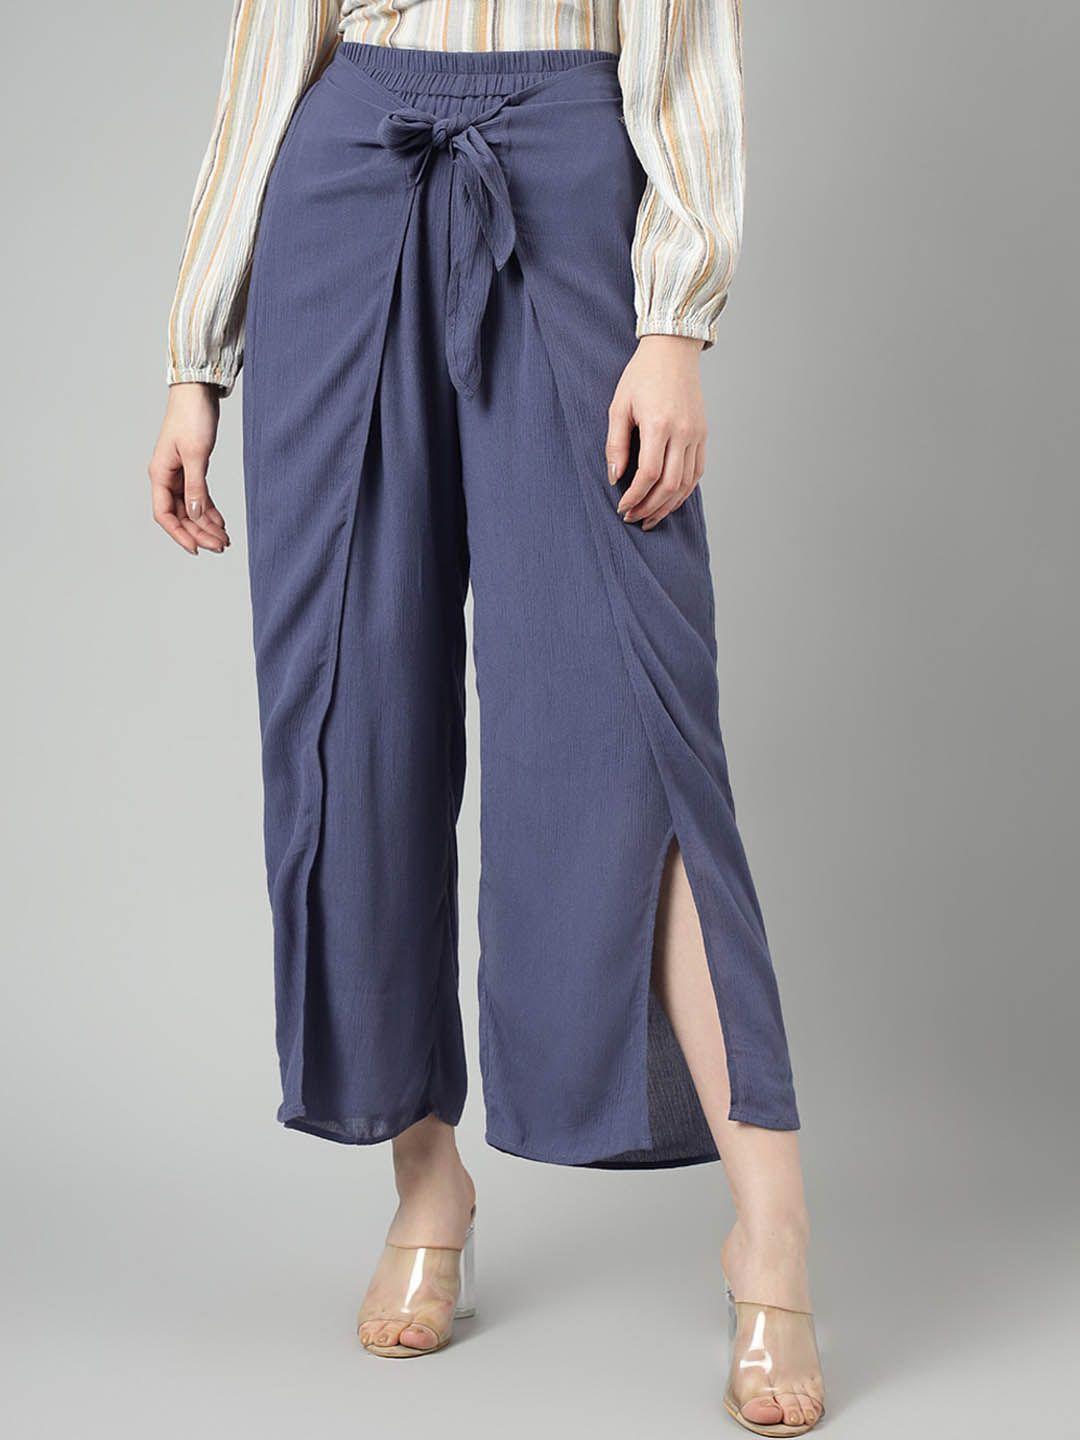 beverly hills polo club women mid-rise wrap parallel trousers